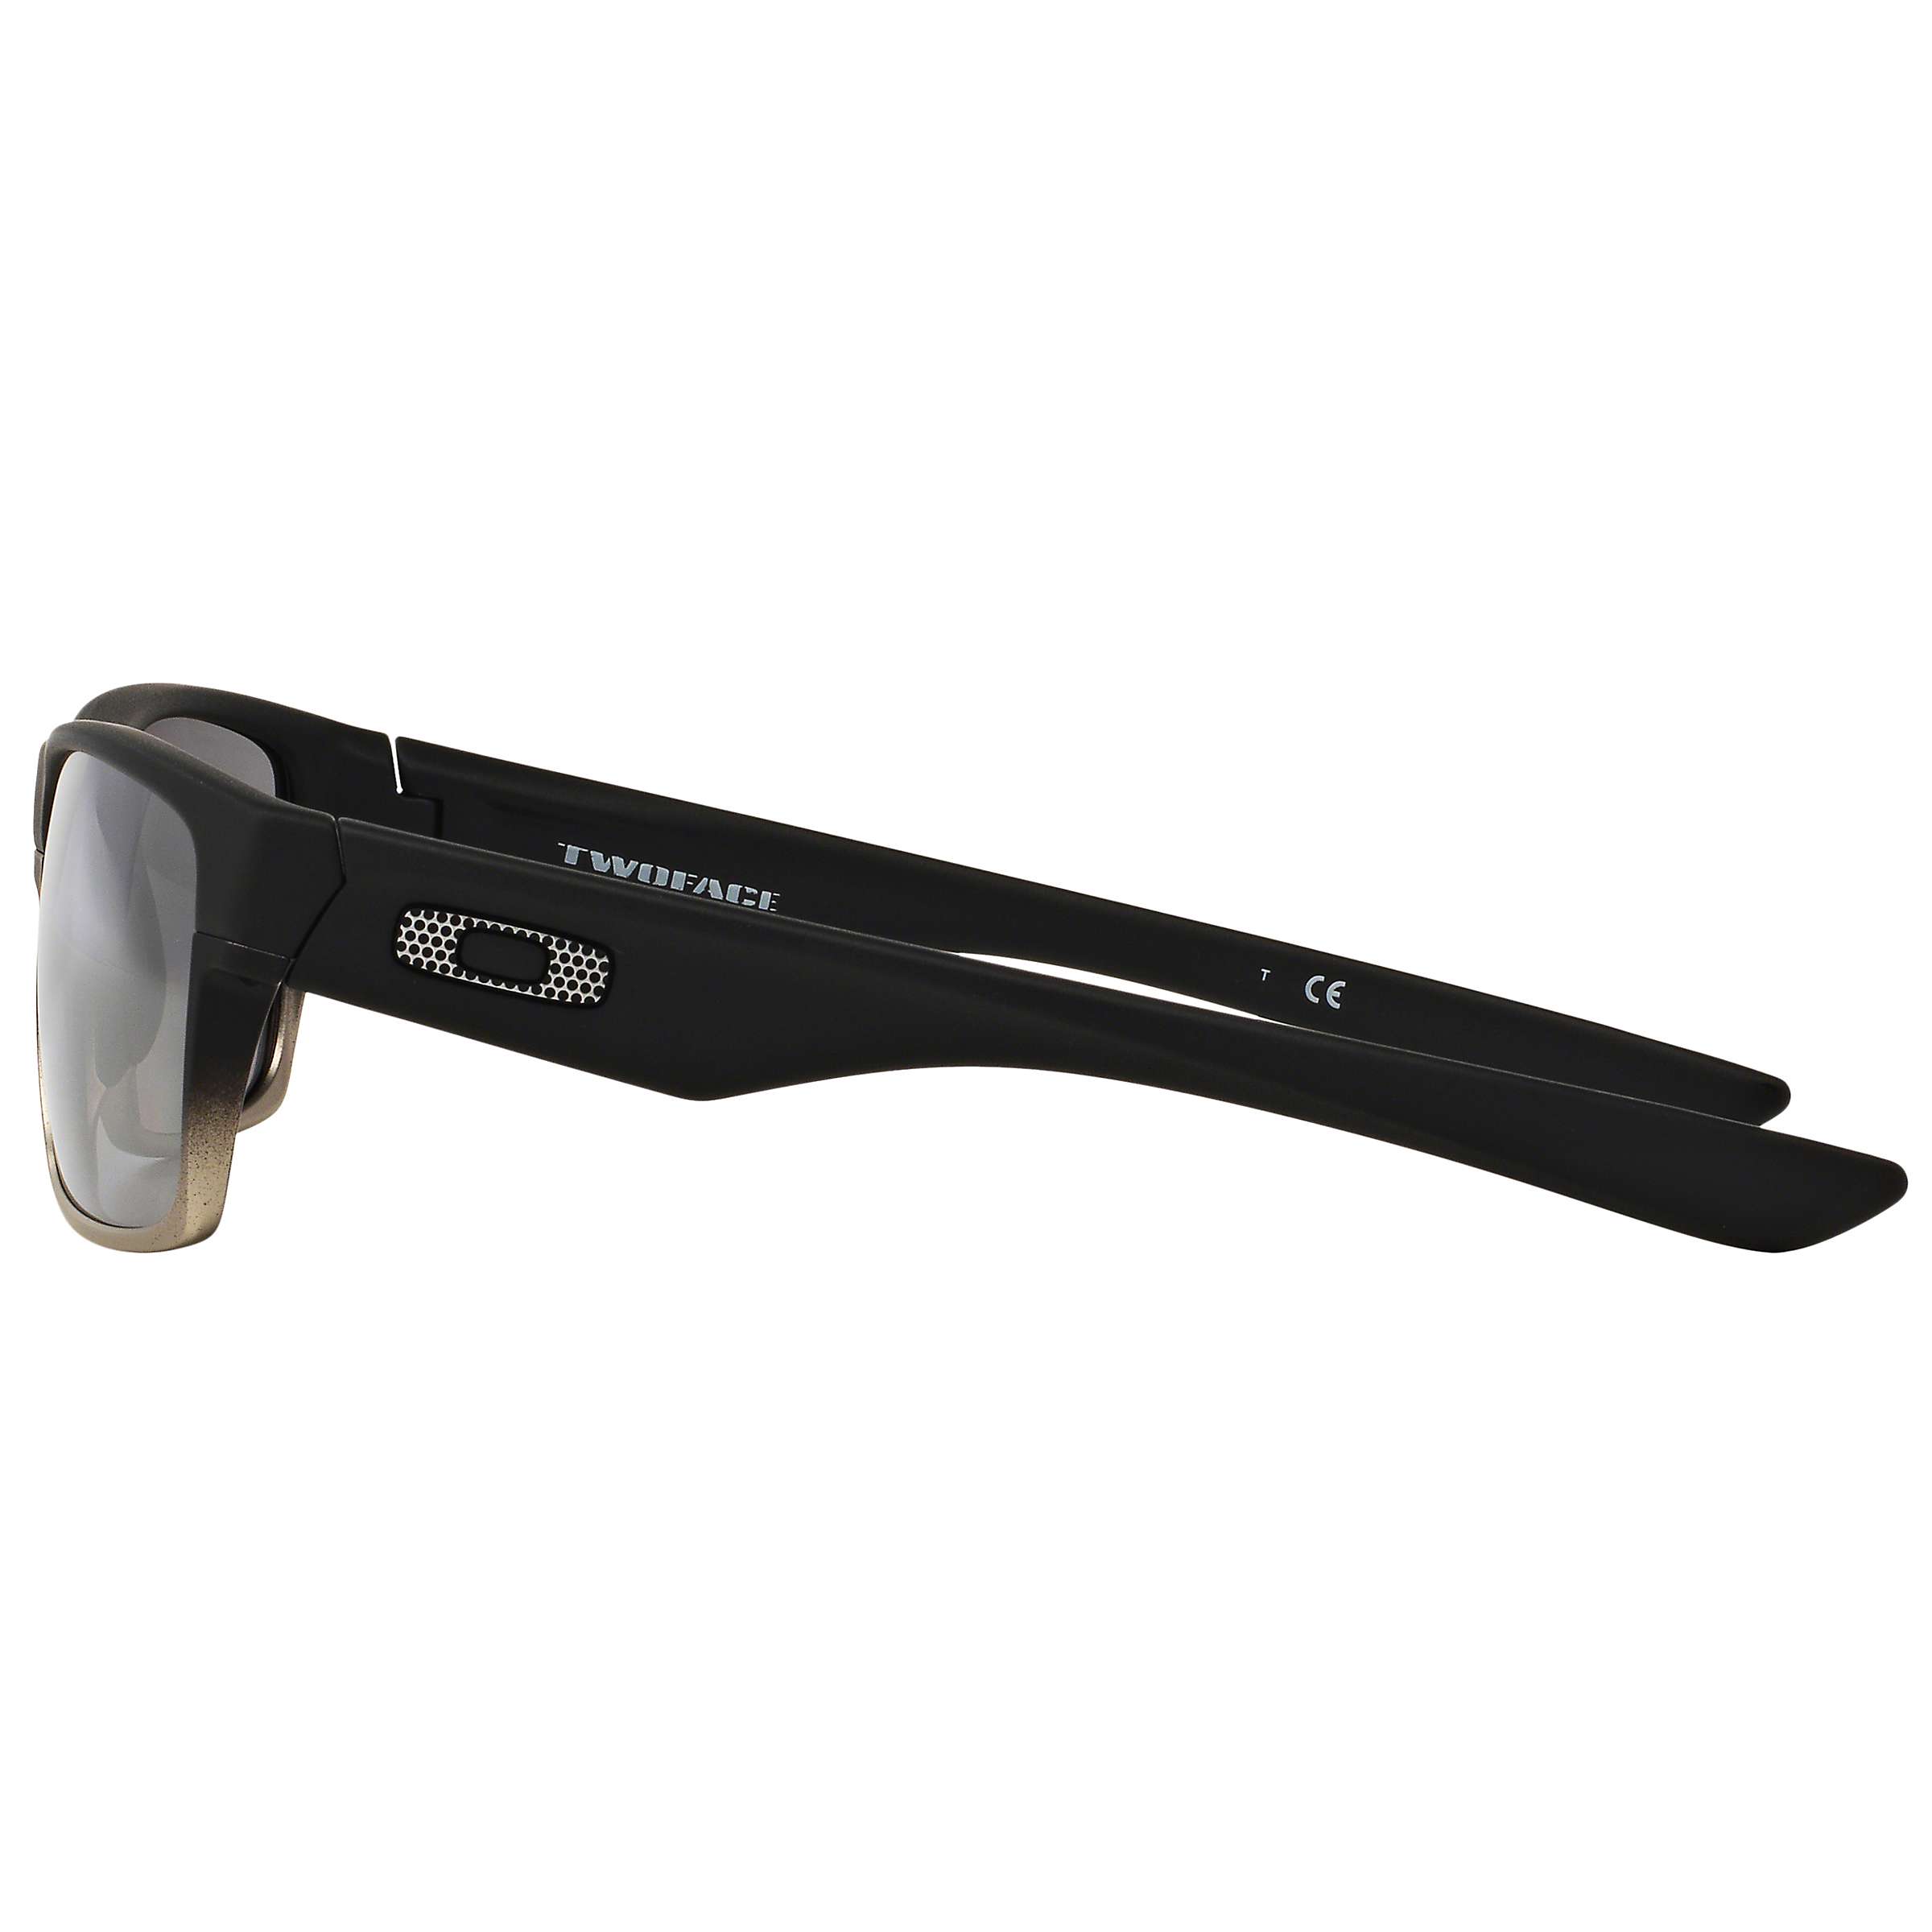 Buy Oakley OO9189 Two Face Rectangular Sunglasses Online at johnlewis.com